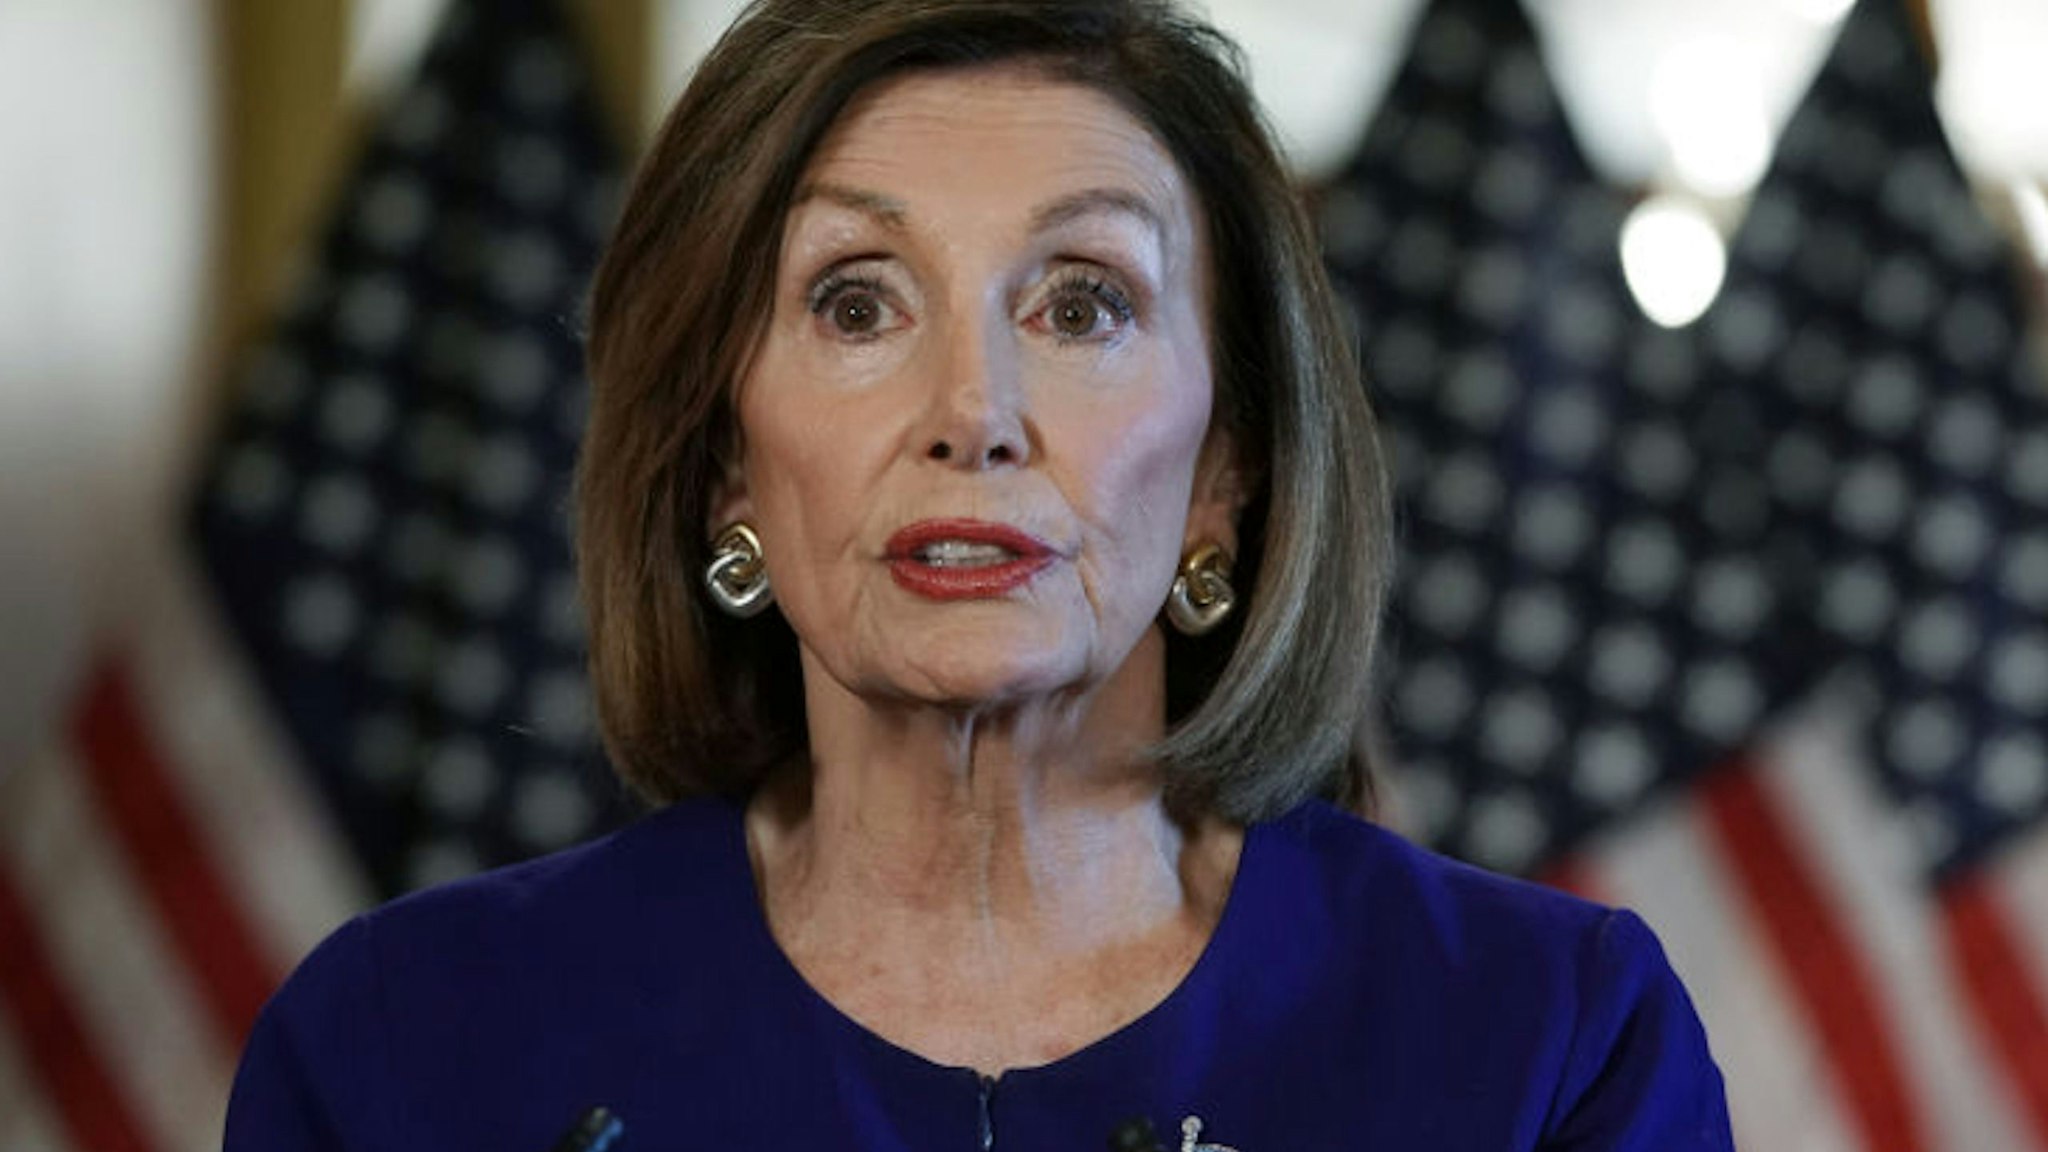 WASHINGTON, DC - SEPTEMBER 24: U.S. House Speaker Nancy Pelosi (D-CA) speaks to the media at the Capitol Building September 24, 2019 in Washington, DC. Pelosi announced a formal impeachment inquiry today after allegations that President Donald Trump sought to pressure the president of Ukraine to investigate leading Democratic presidential contender, former Vice President Joe Biden and his son, which was the subject of a reported whistle-blower complaint that the Trump administration has withheld from Congress